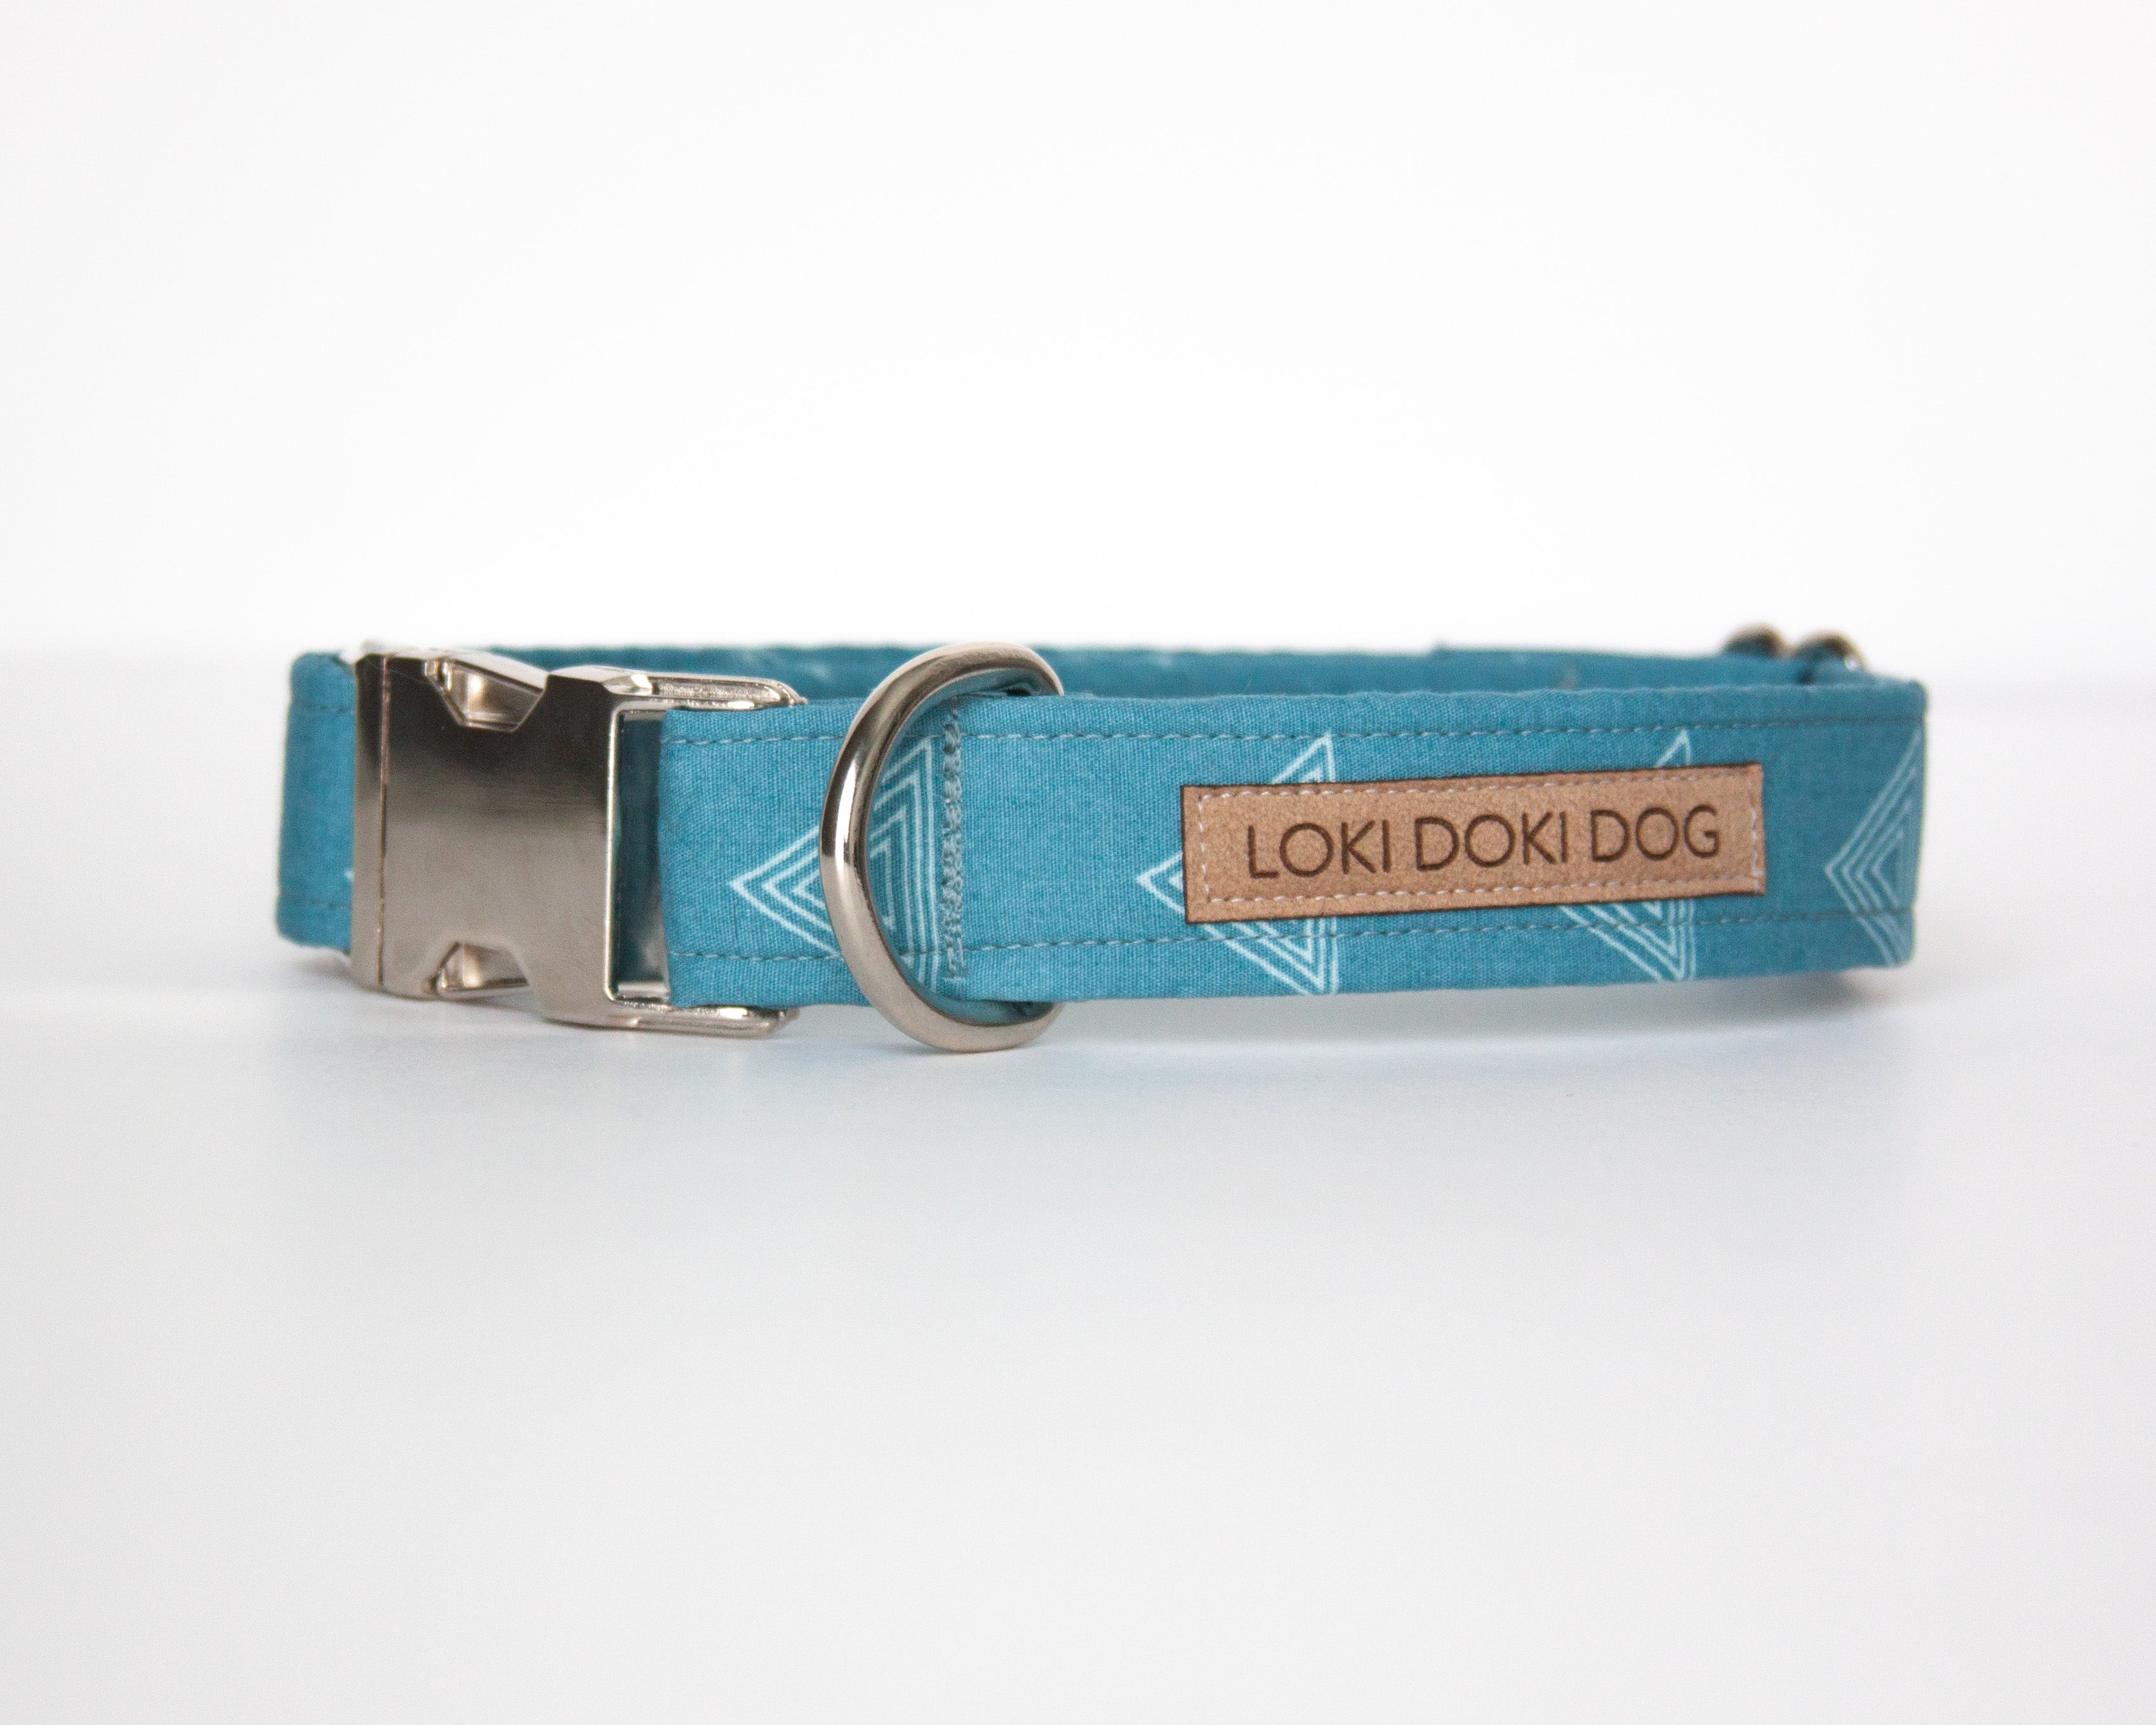 Pet Collar in Tiffany Blue Leather, Medium, Size: 11-14 in.